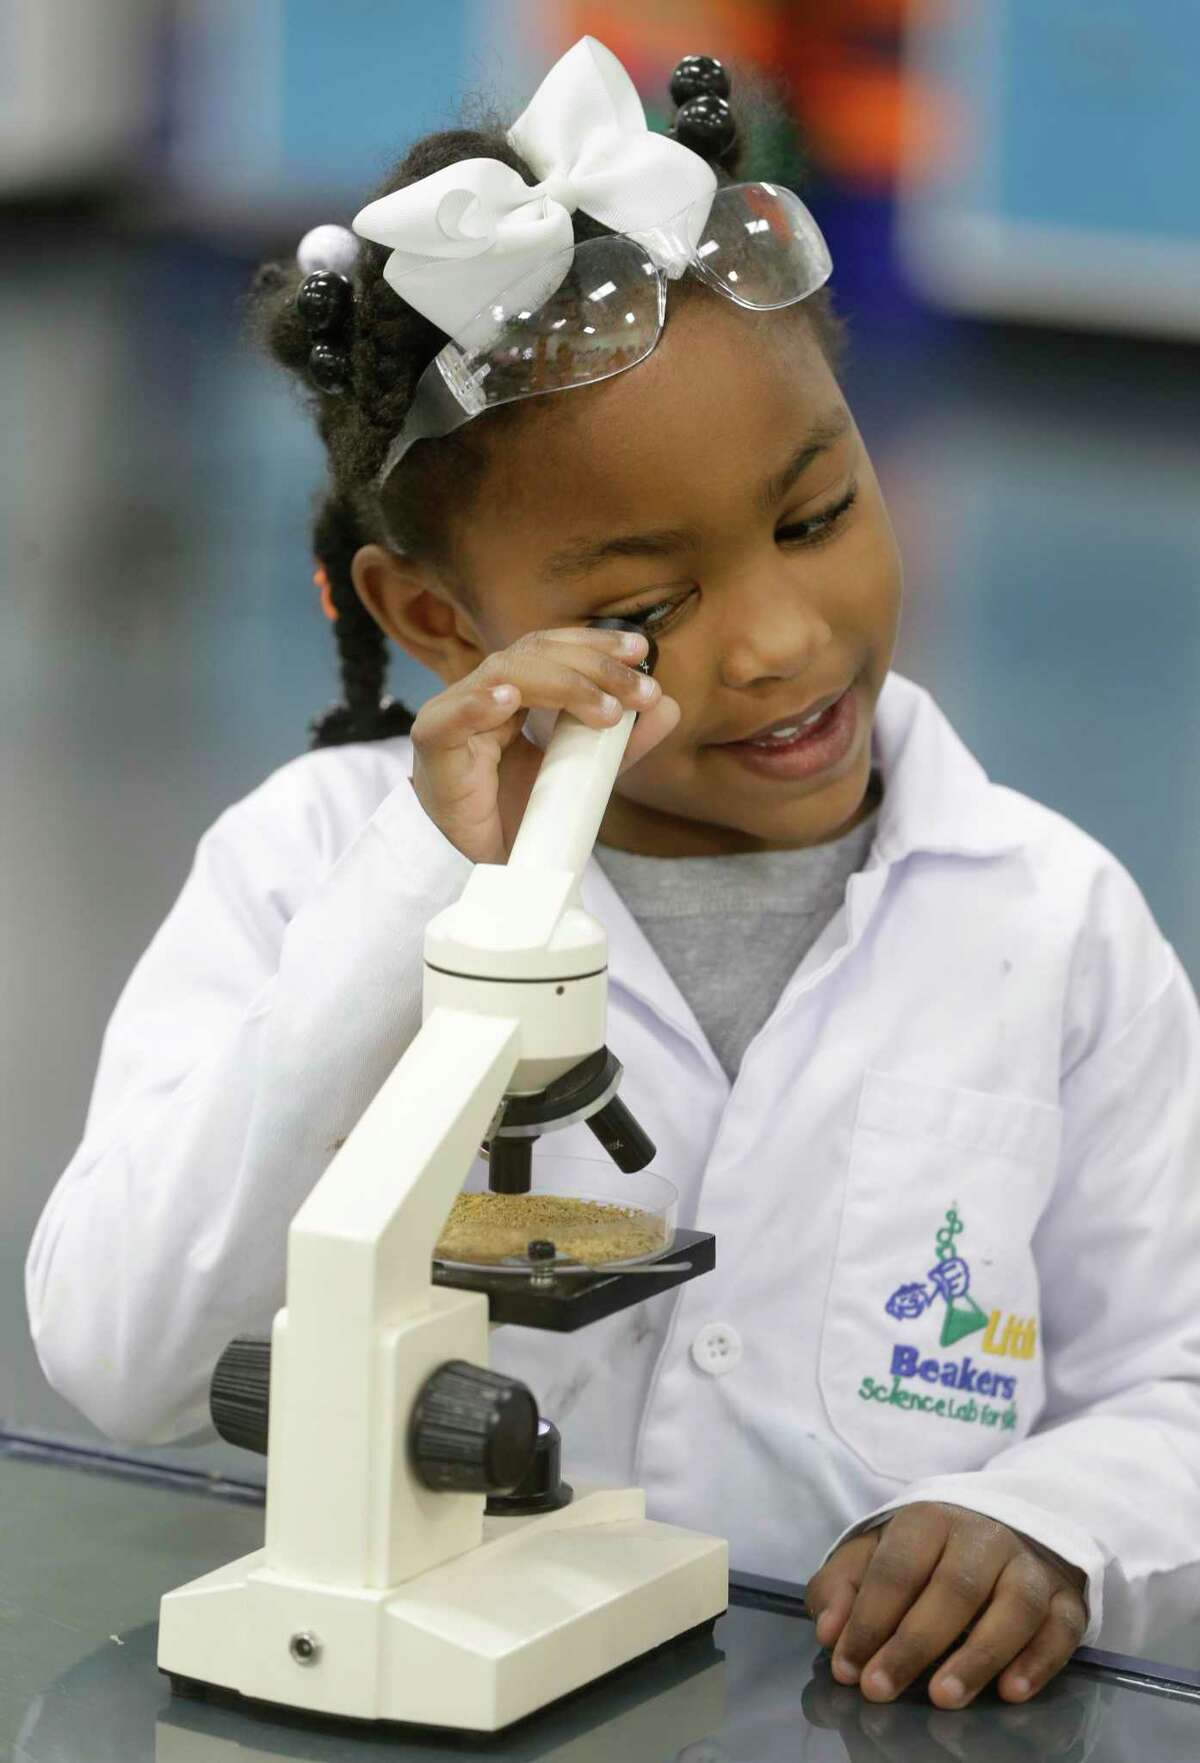 Little Beakers in Cypress is offering a five-day environmental science camp for kids. Shown here: Jaira Ford, 6, works on an experiment at Little Beakers, 26803 Hanna Rd., Monday, Jan. 15, 2018, in Oak Ridge North. ( Melissa Phillip / Houston Chronicle )